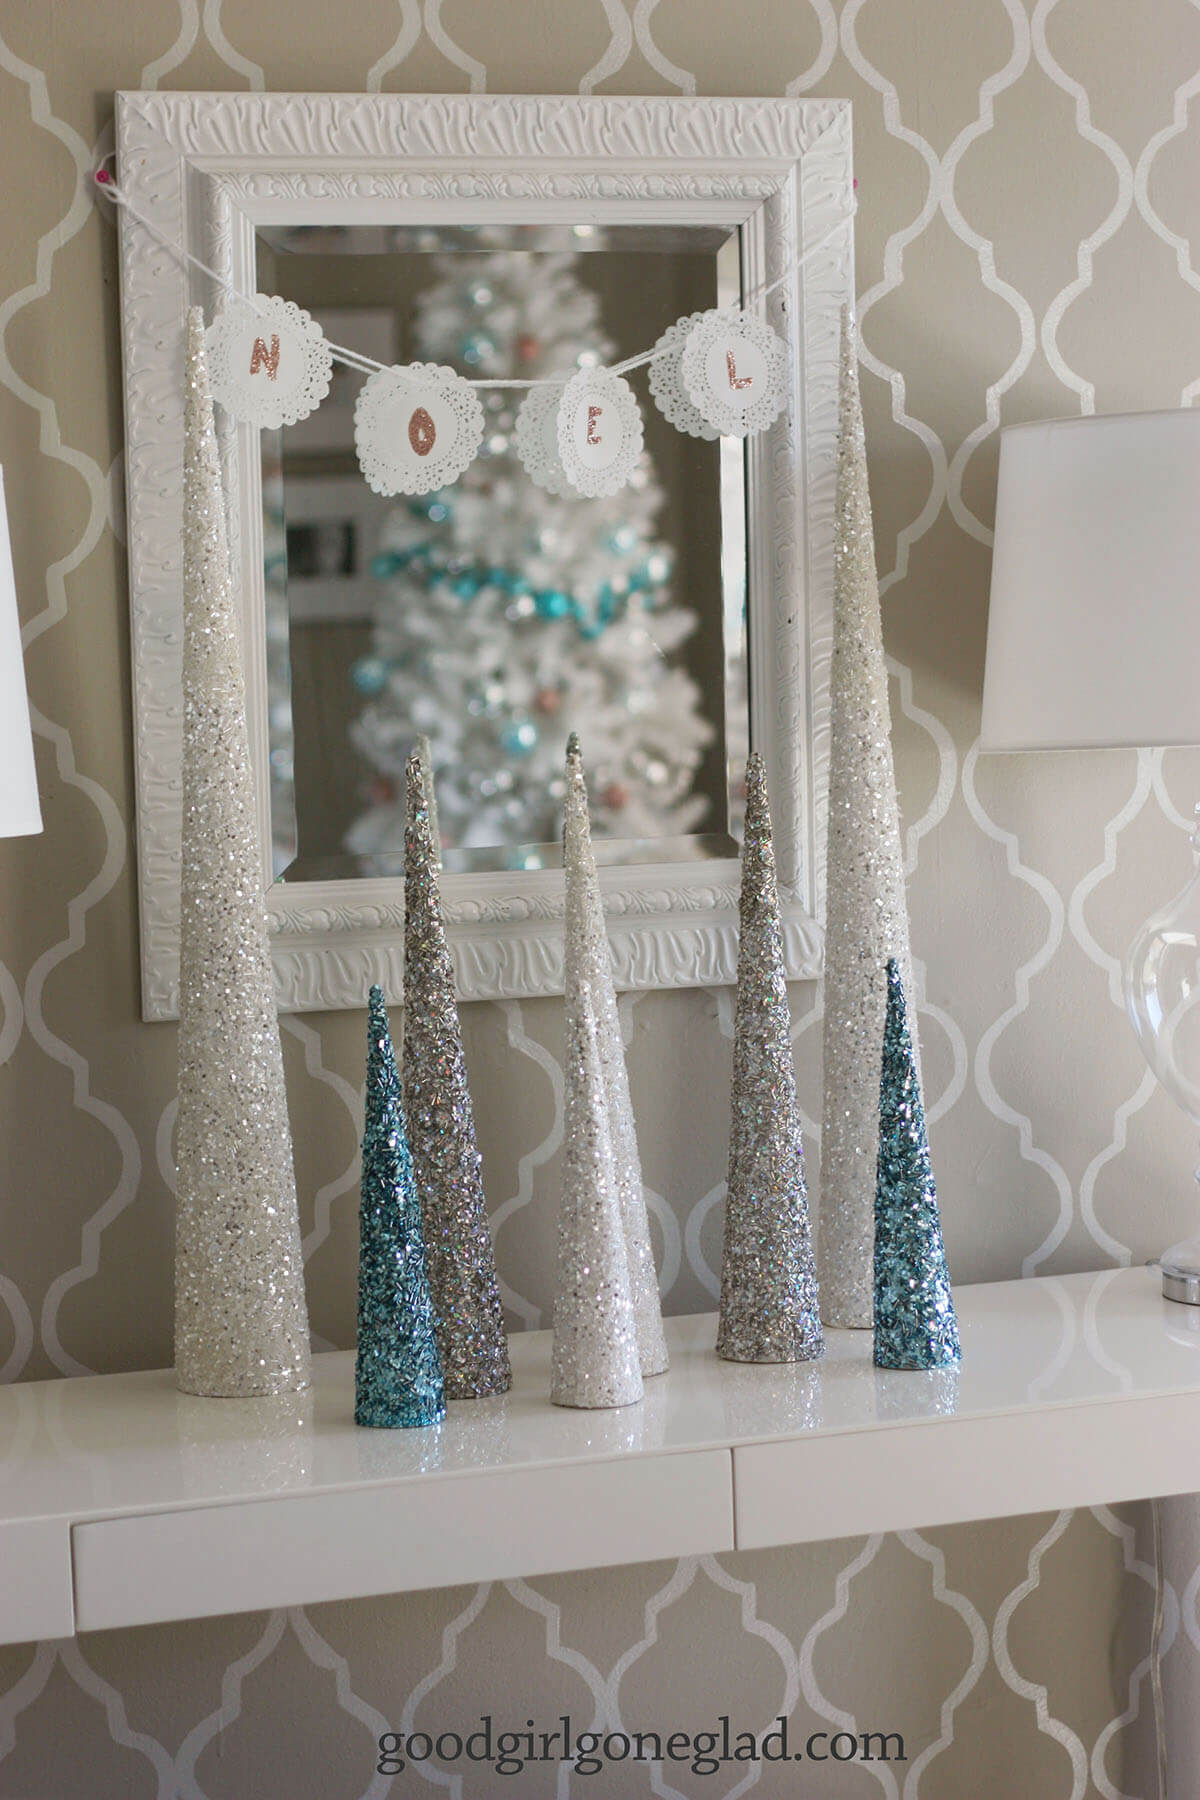 A Sparkling Silvery Forest Display